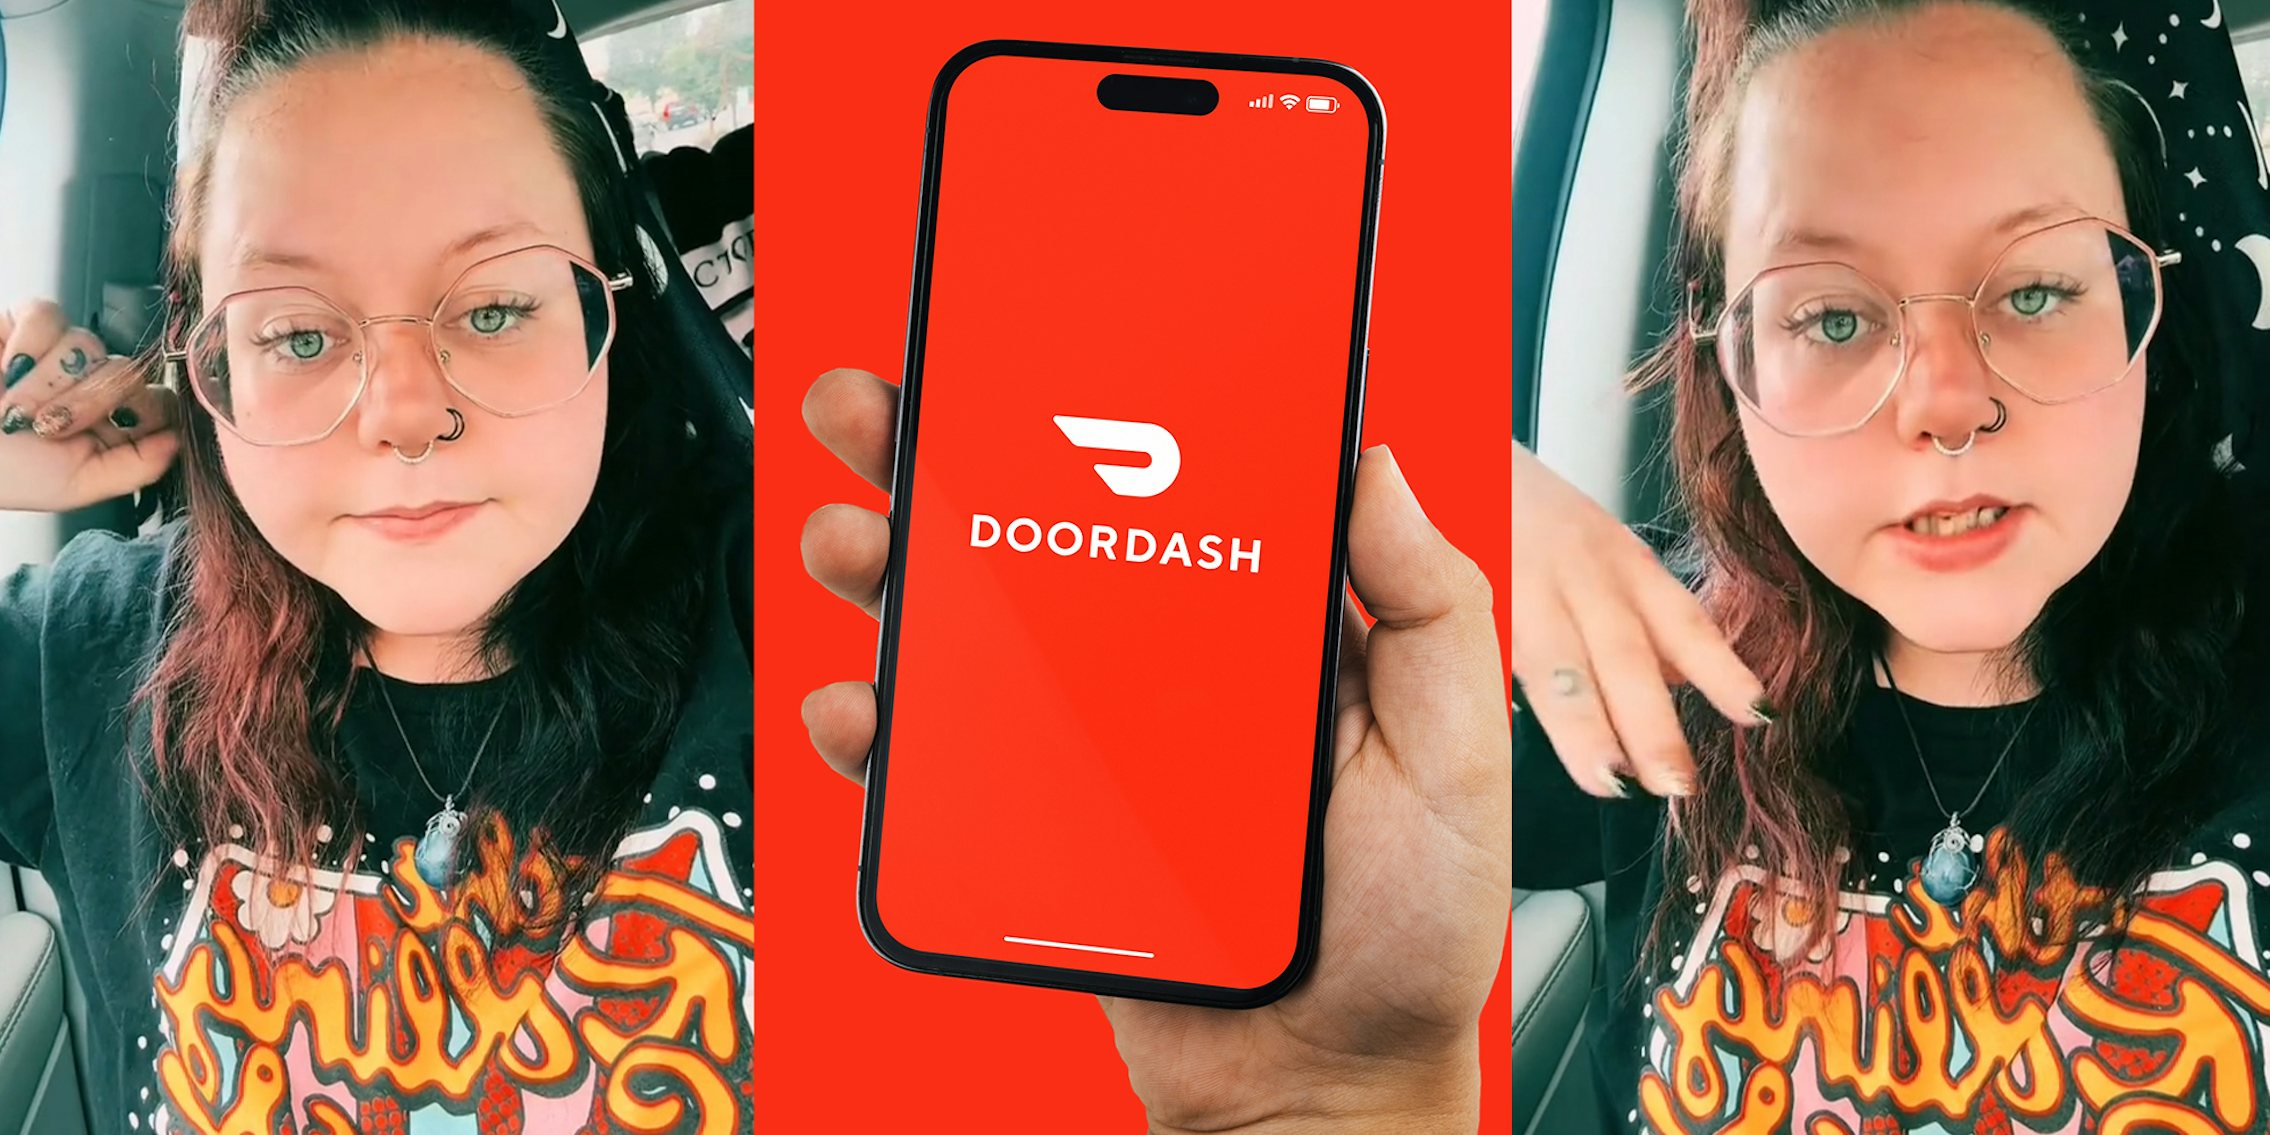 DoorDash driver takes a risk and accepts cash order.